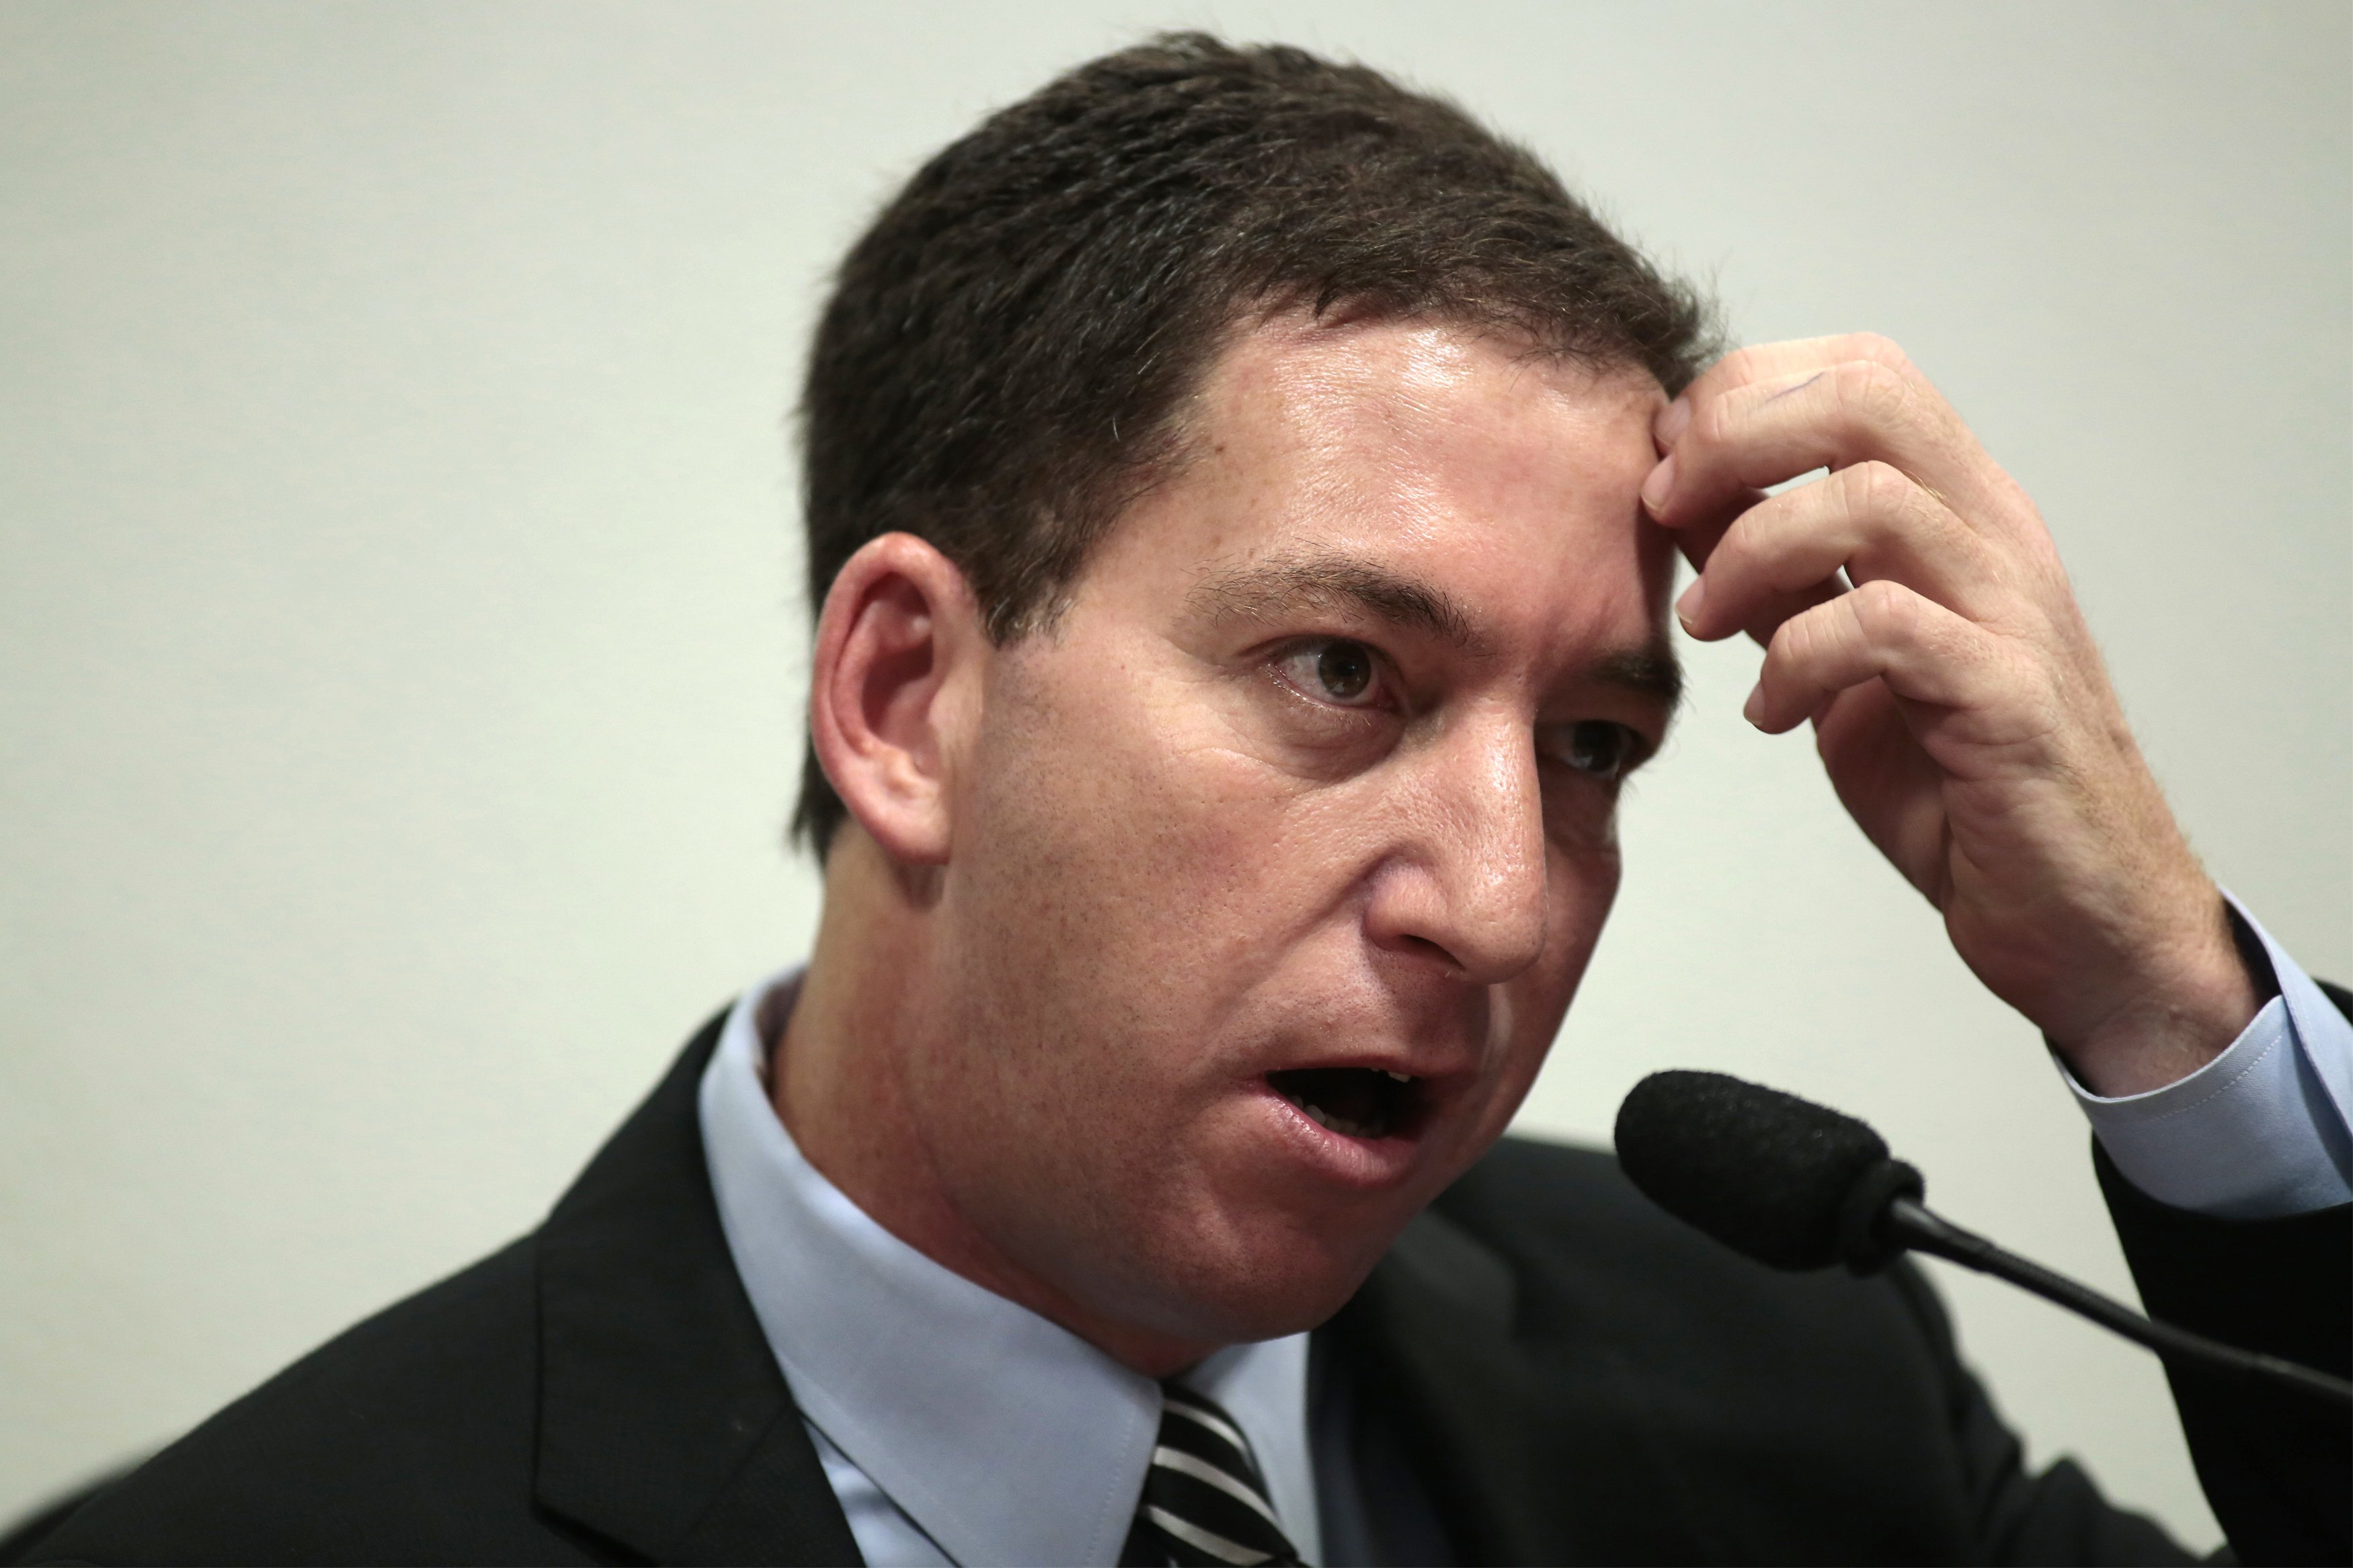 Snowden has more U.S.-Israel secrets to expose: Greenwald